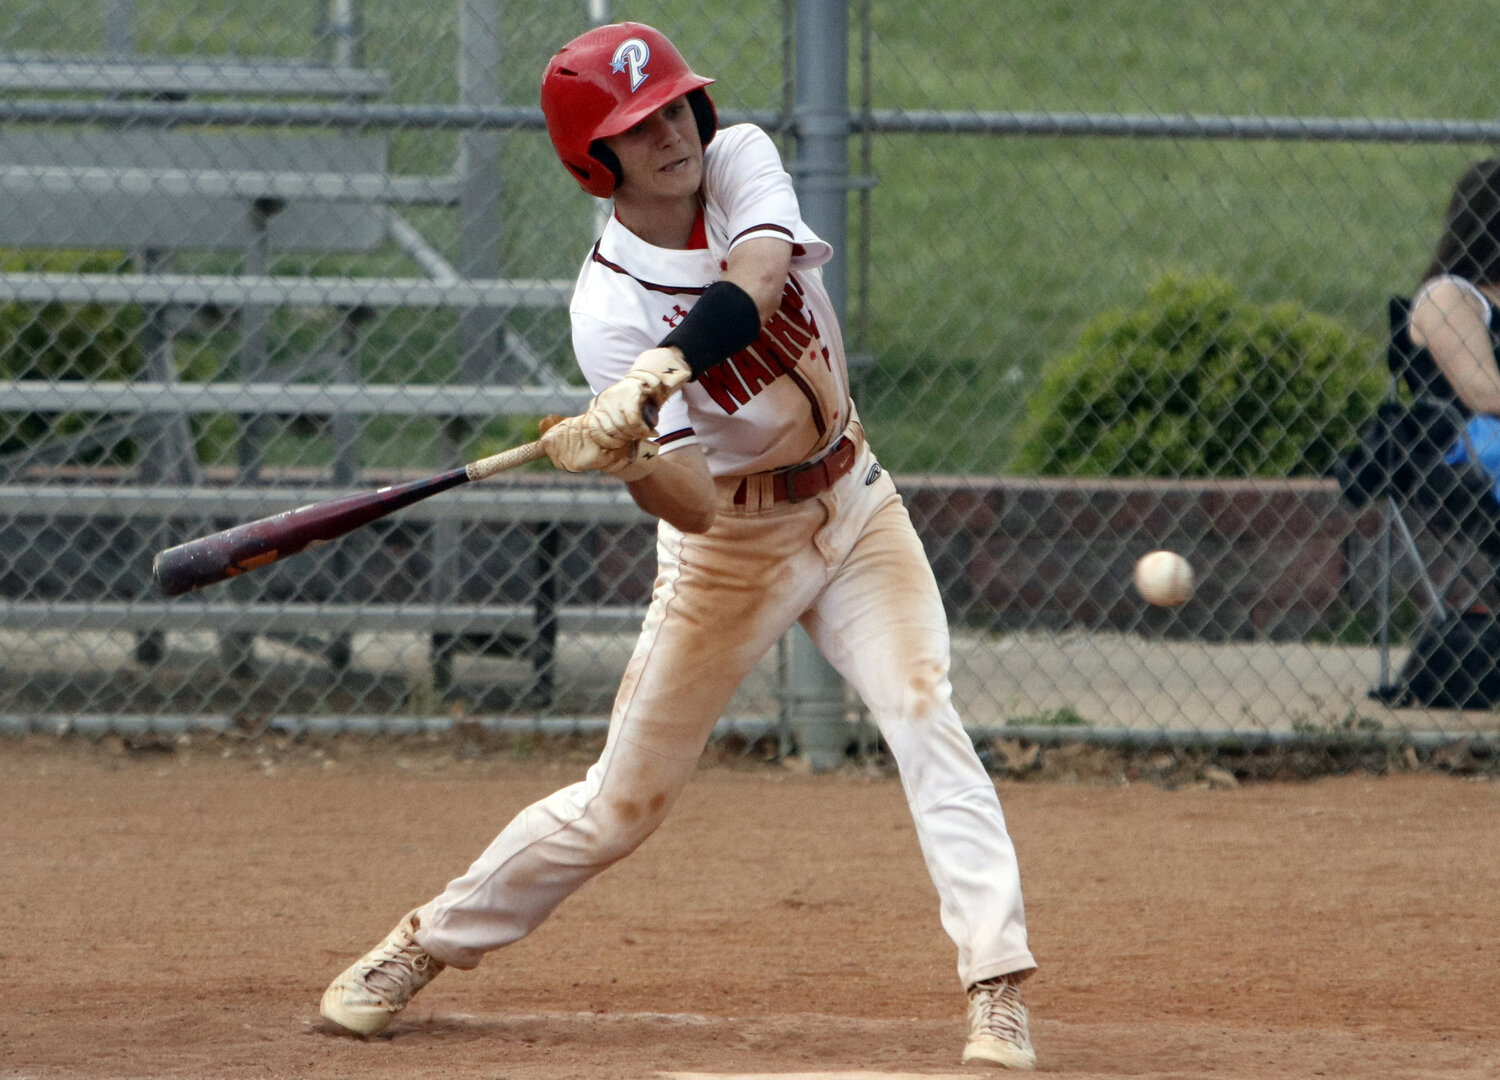 Caleb Clark swings at a pitch during Warrenton's loss to Troy Buchanan.